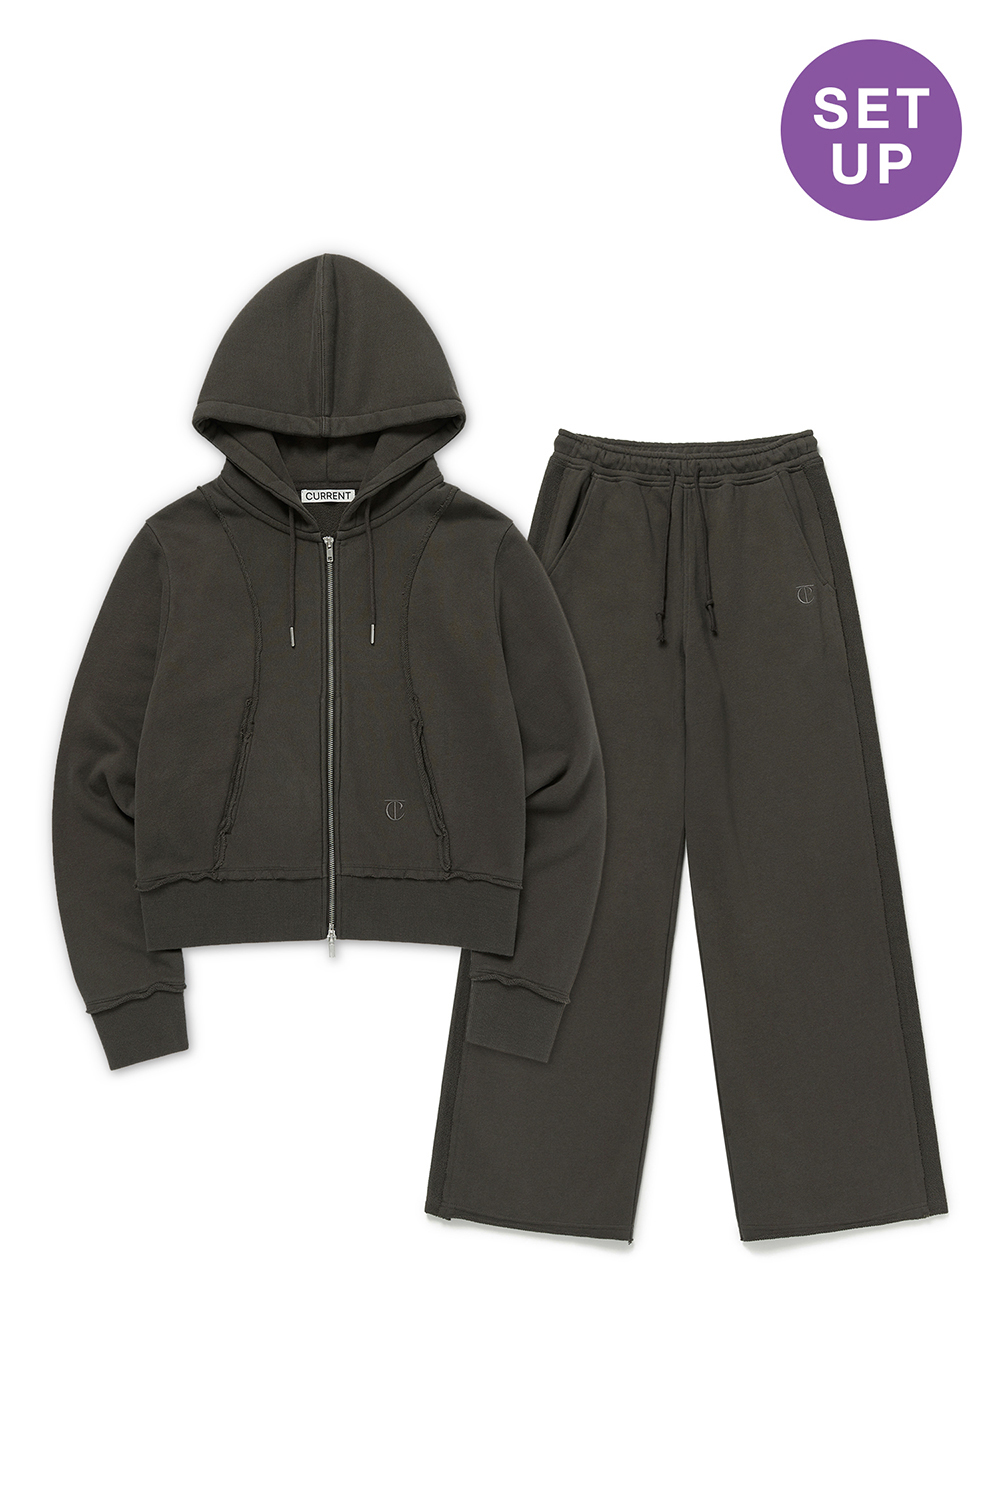 CUT OFF DETAIL HOODED SET-UP [CHARCOAL]		